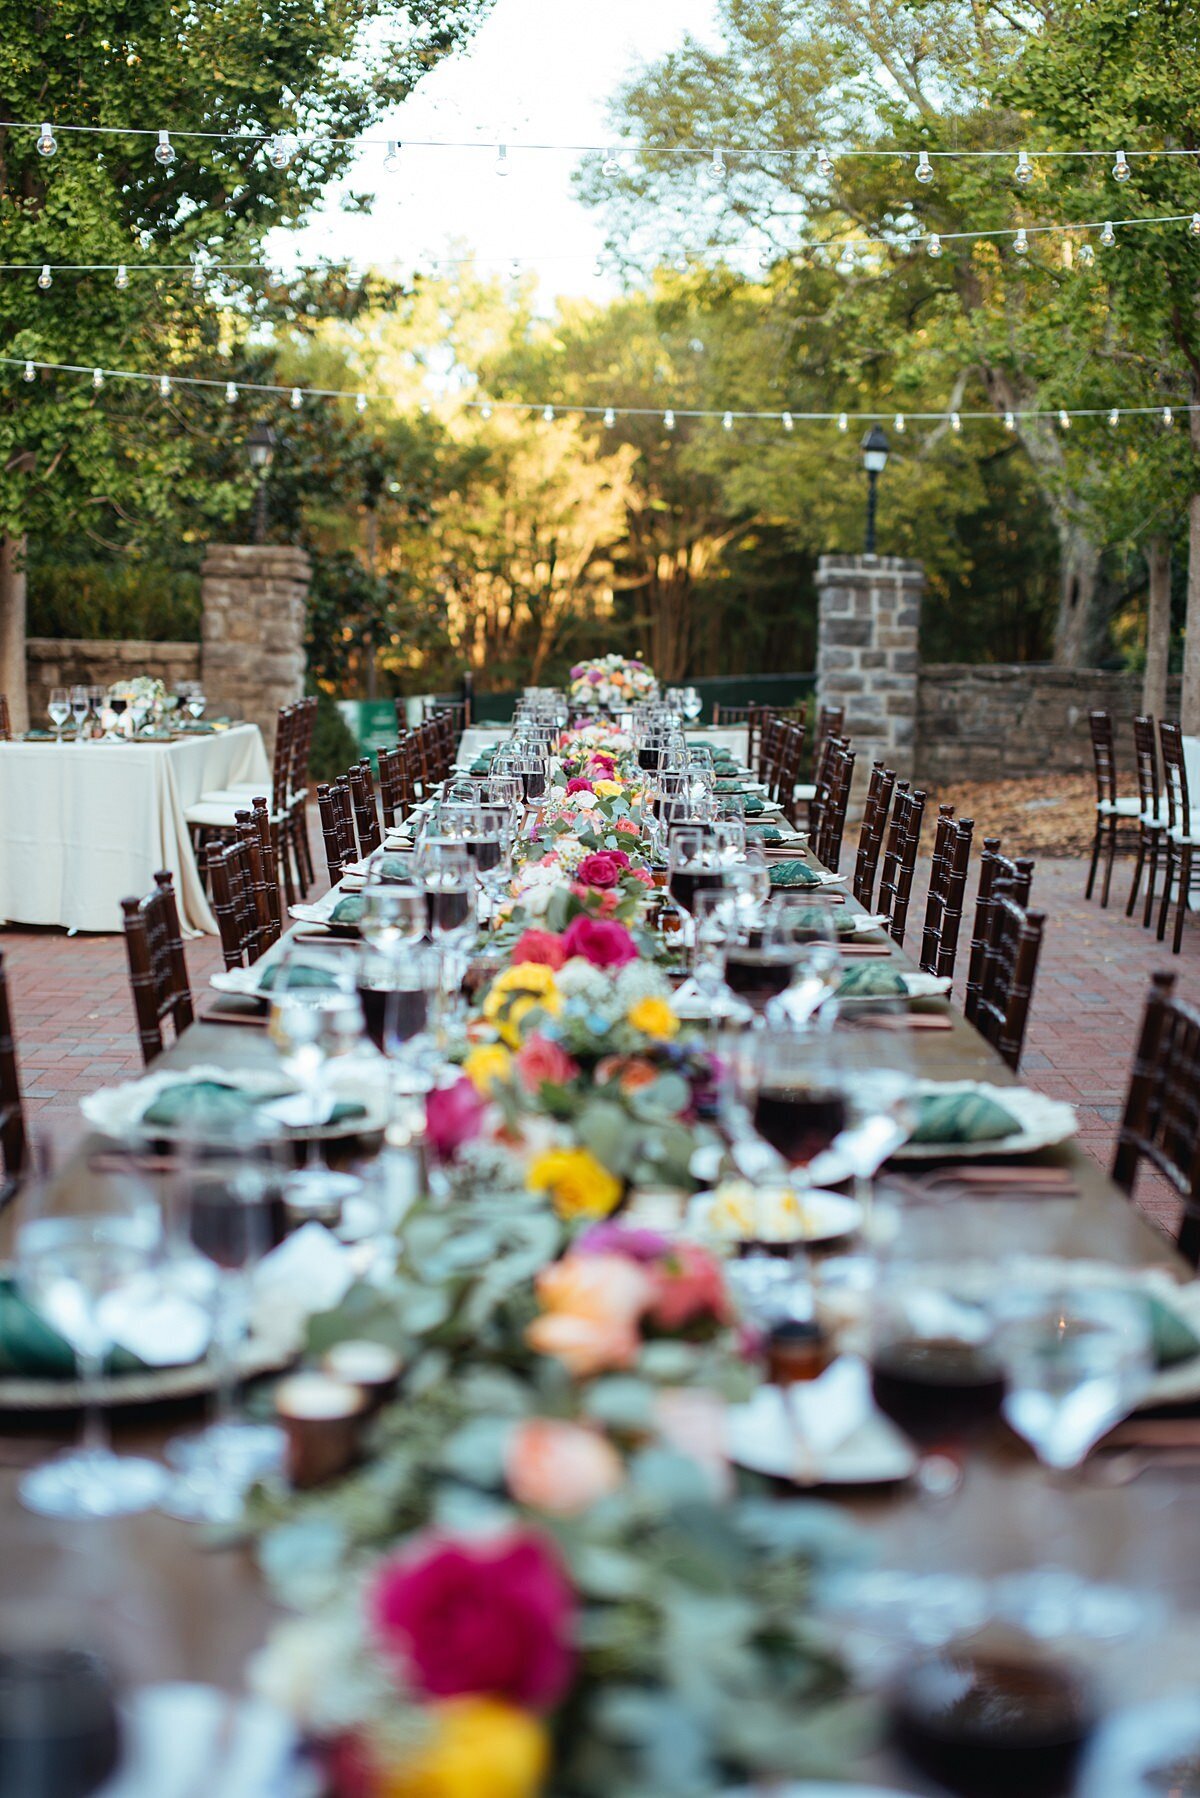 Very long table set for guests in the exposed brick courtyard at Cheekwood Botanical Garden. The dark wood farm table is set with hot pink and yellow roses in a thick green garland down the center of the table. The long reception table is set with gold chargers, forest green brocade napkins, glasses of water and glasses of red wine as well as matte gold flatware.